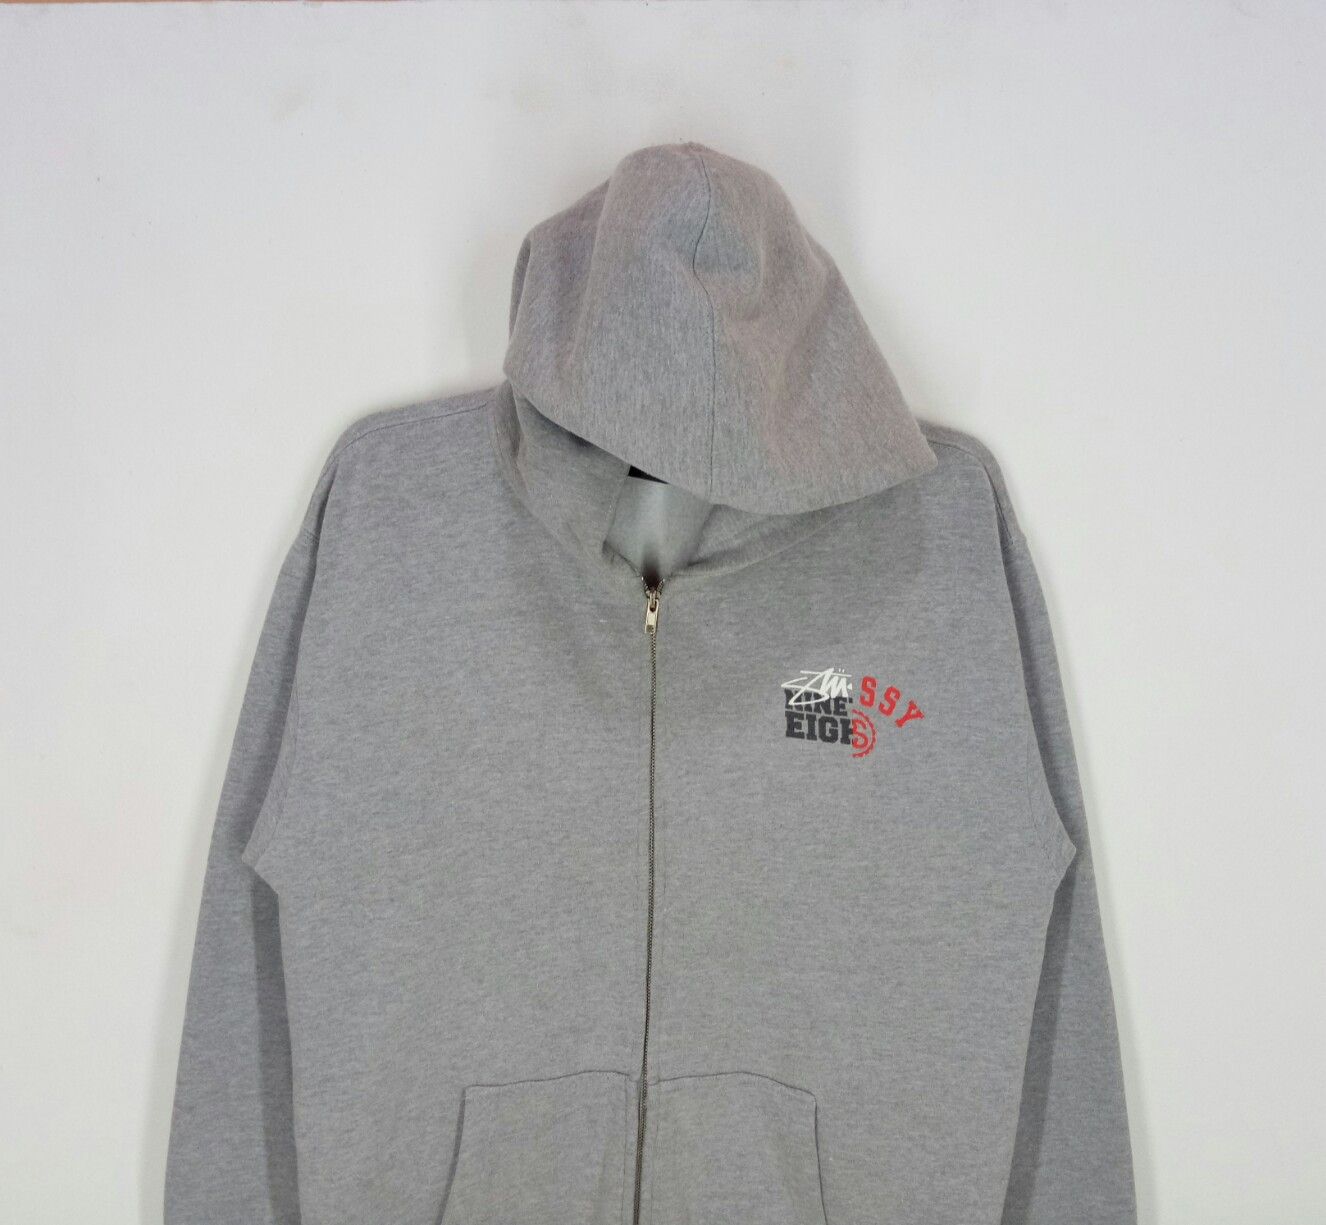 Stussy Rare!! STUSSY hoodies large size Size US L / EU 52-54 / 3 - 2 Preview